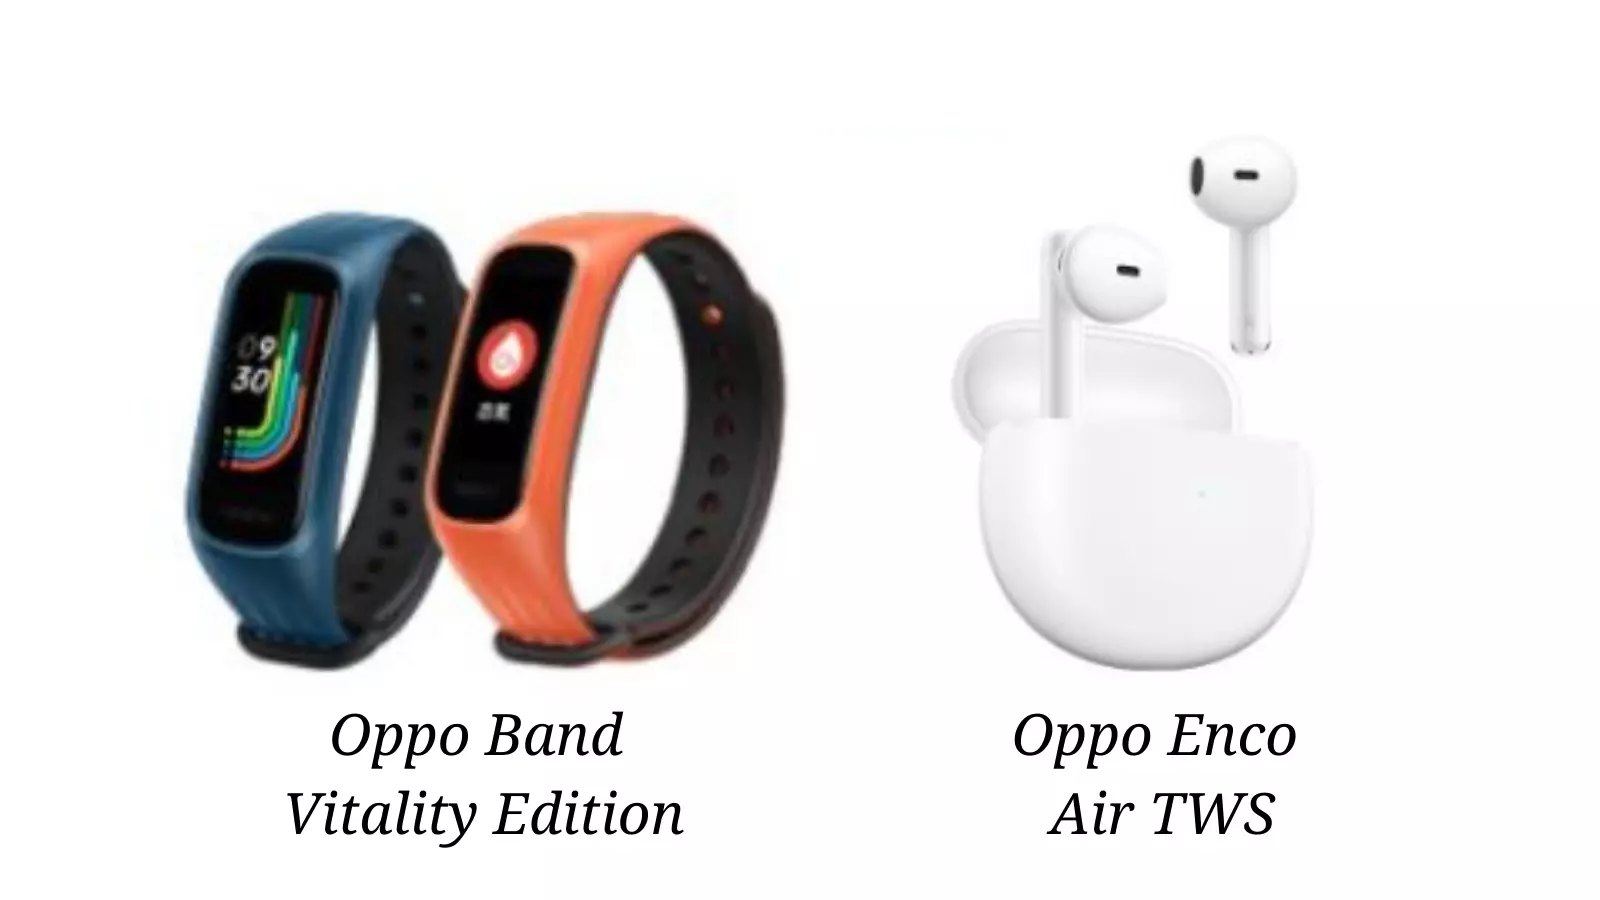 oppo band vitality edition, oppo enco air